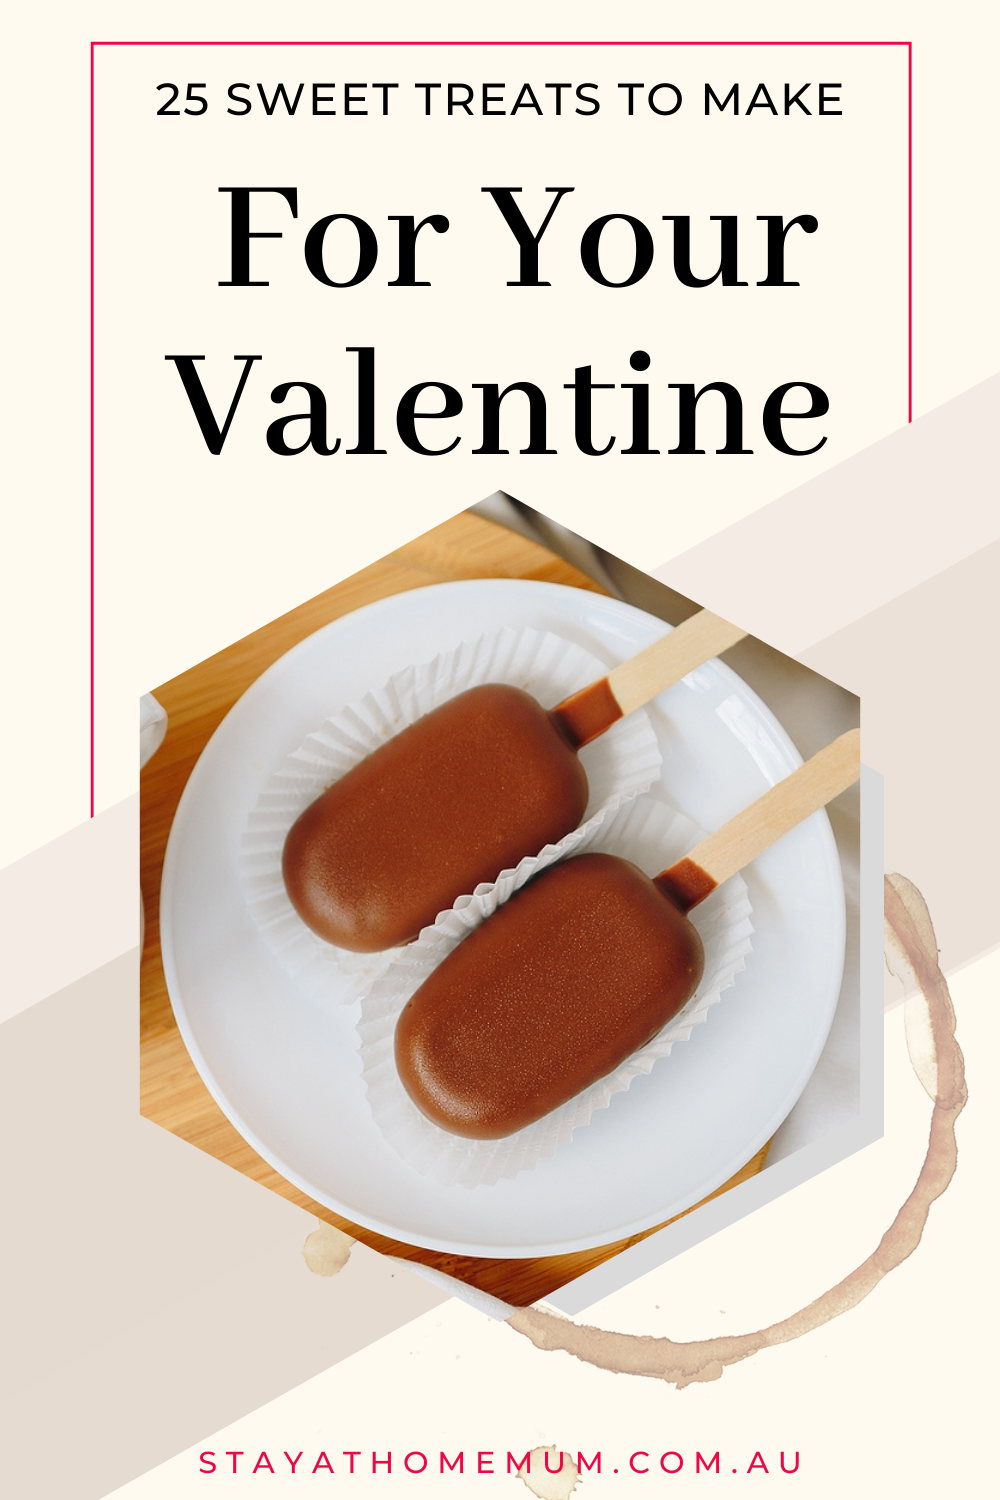 25 Sweet Treats To Make For Your Valentine | Stay At Home Mum